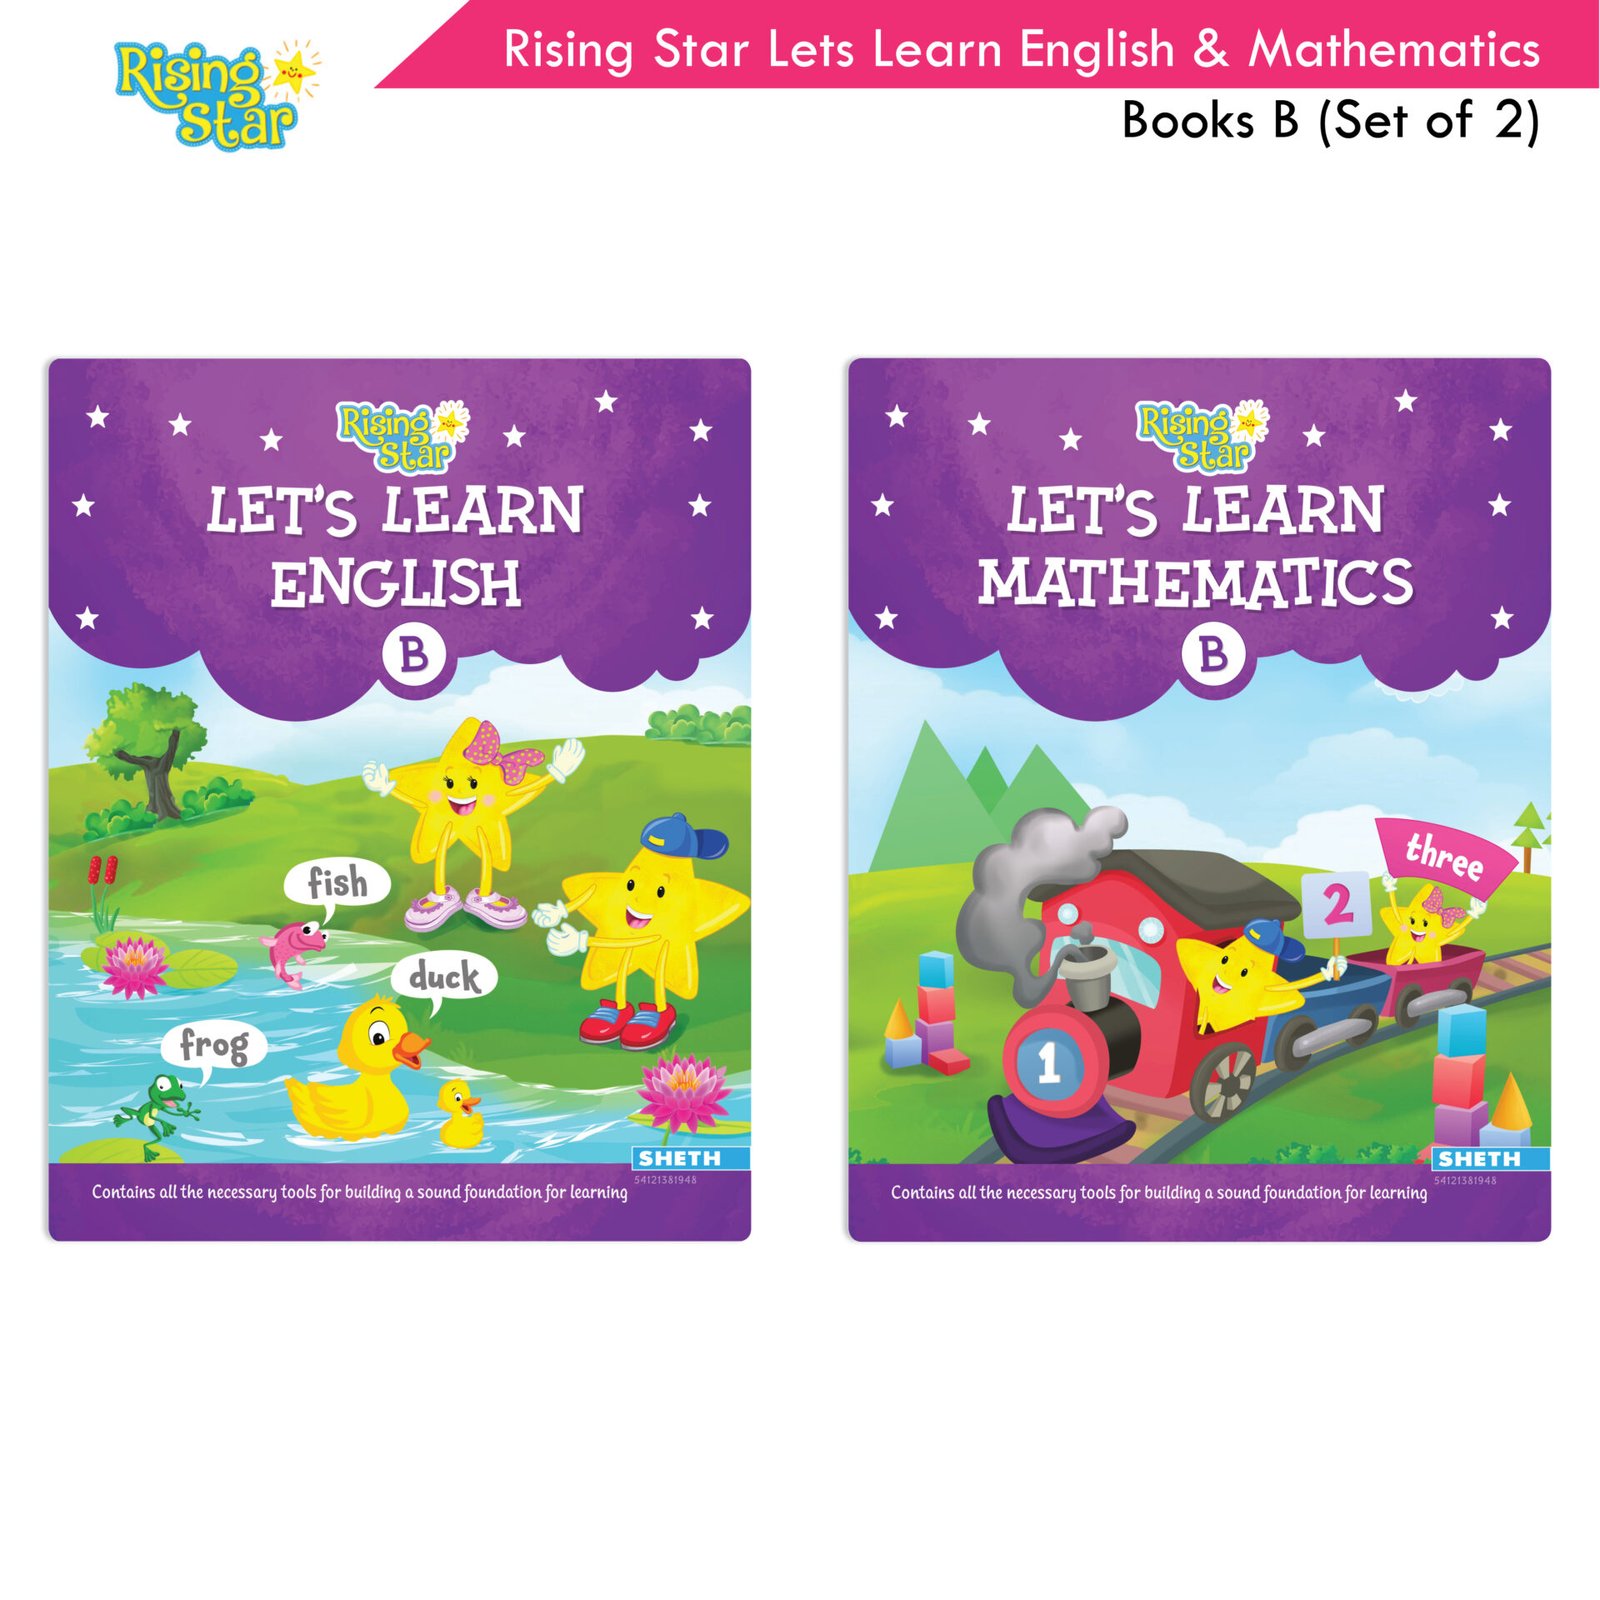 Rising Star Lets Learn English and Mathematics Books B Set of 2 1